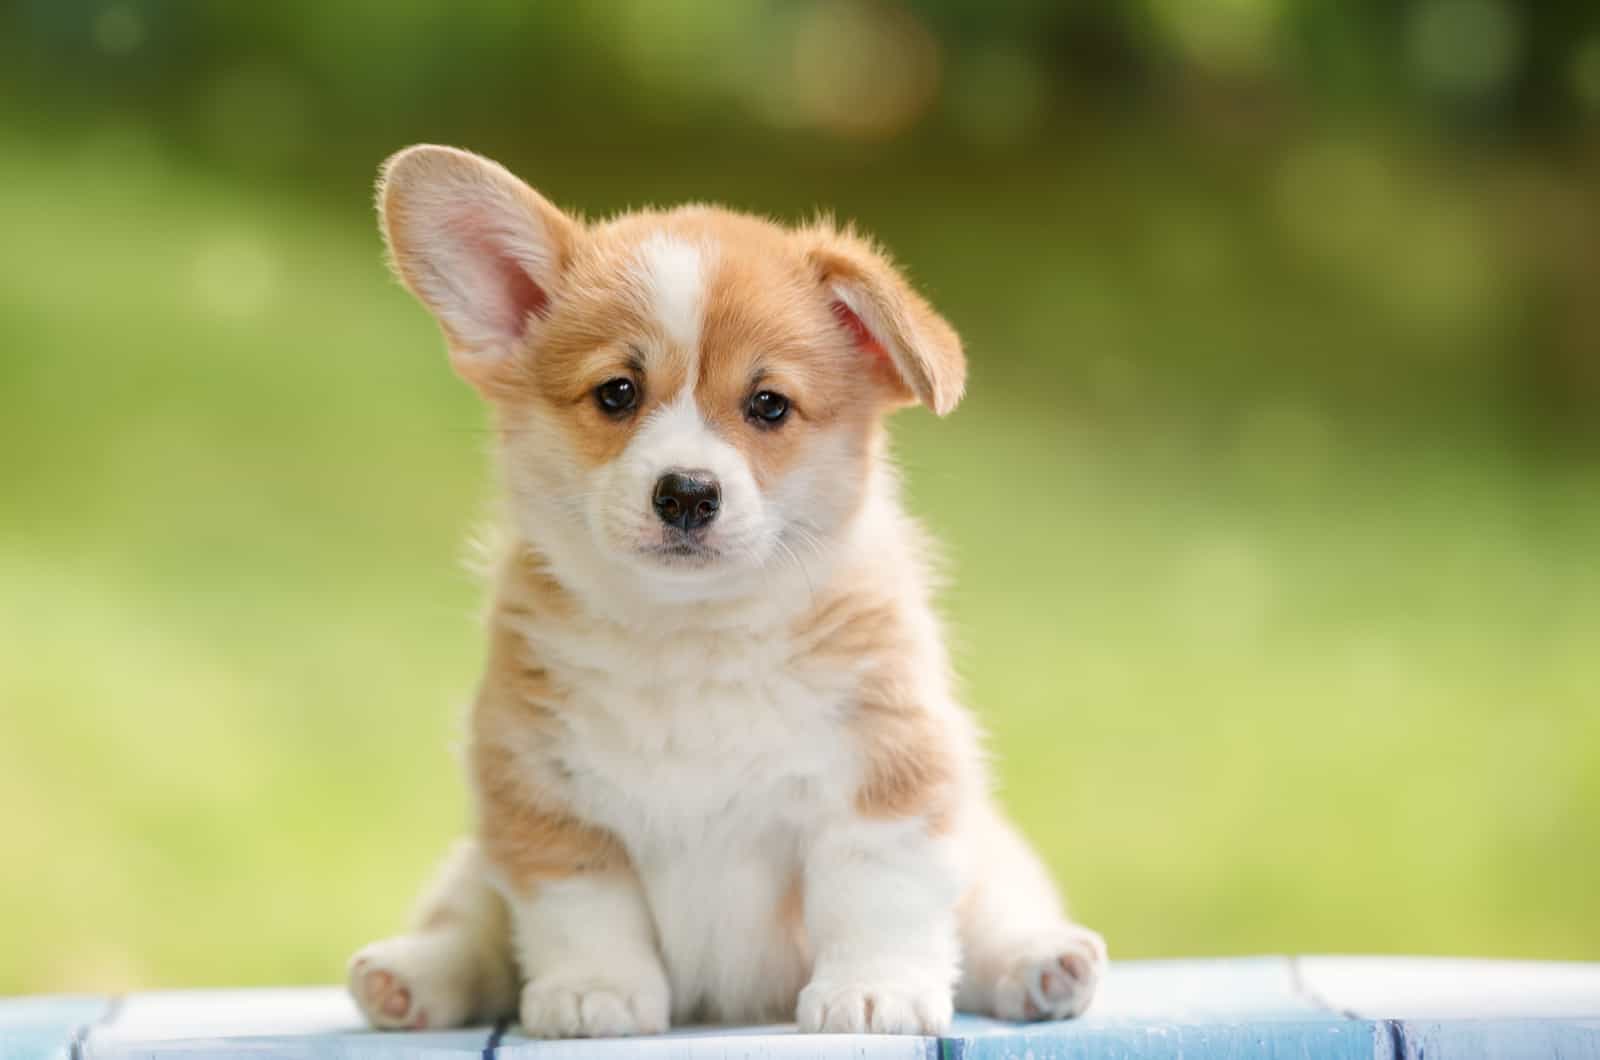 When Do Puppies Calm Down? A Guide For Managing Puppyhood